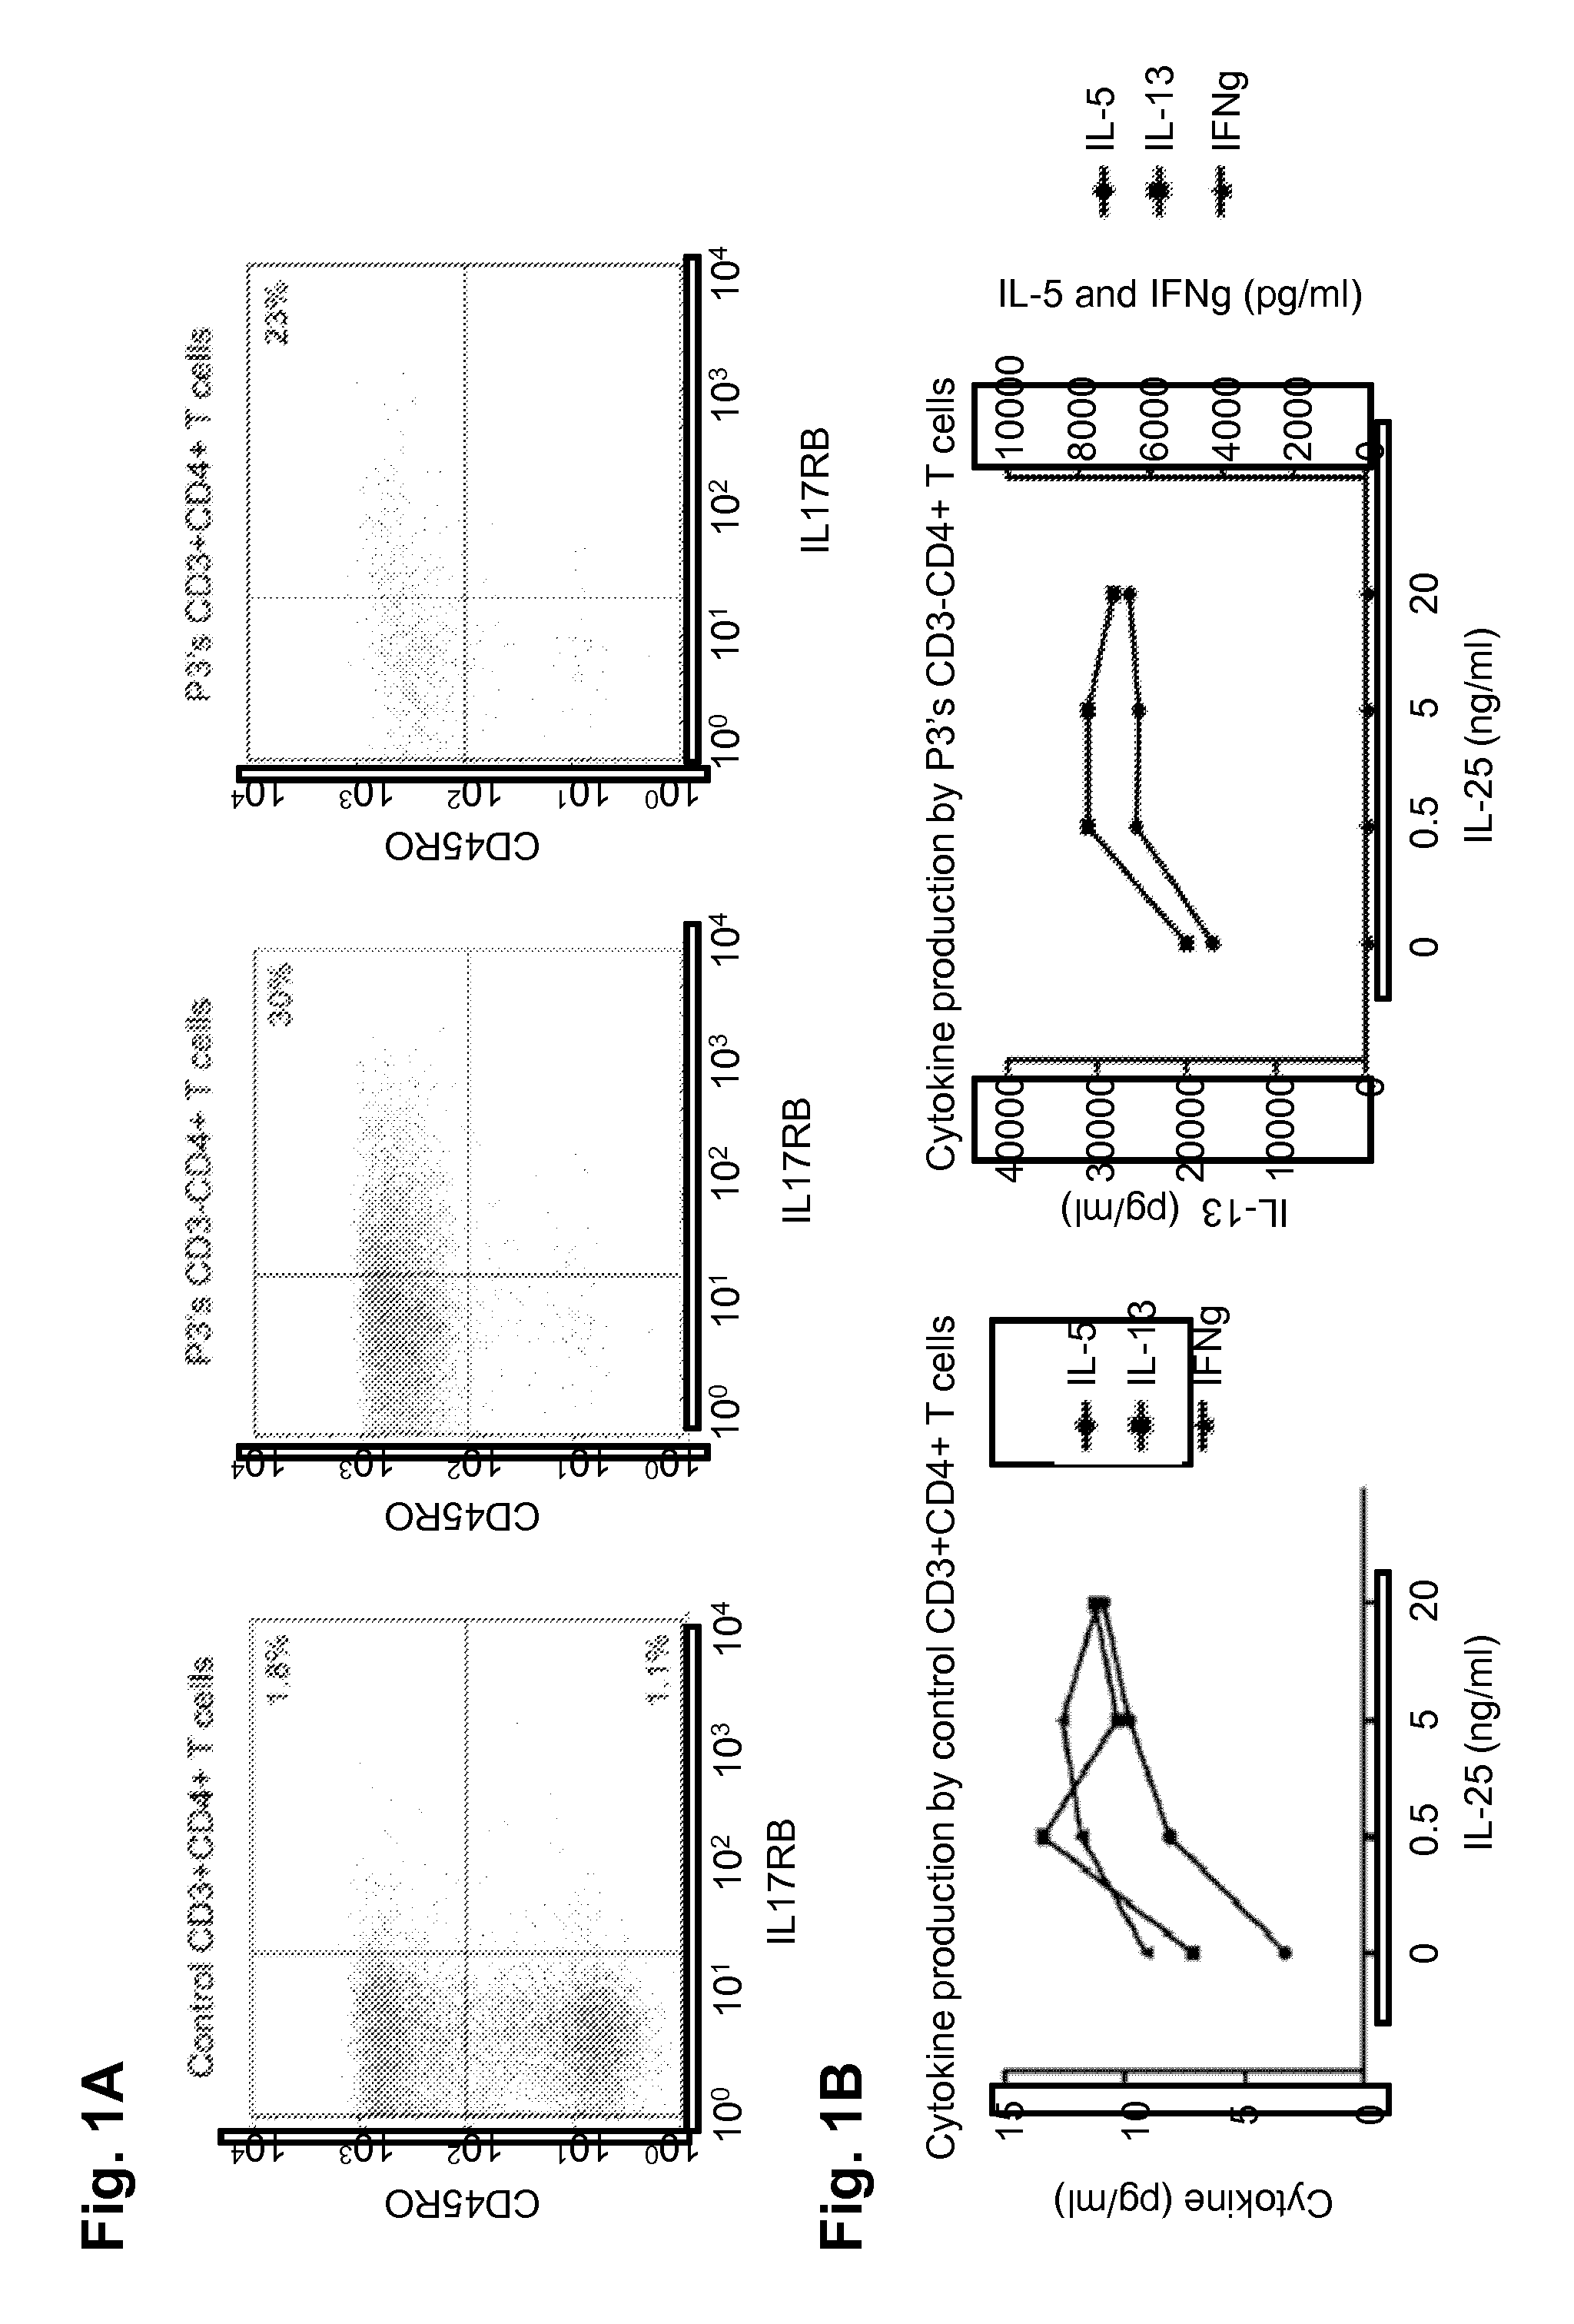 Diagnostic method and kit for the detection of a lymphocytic variant of hypereosinophilic syndrome